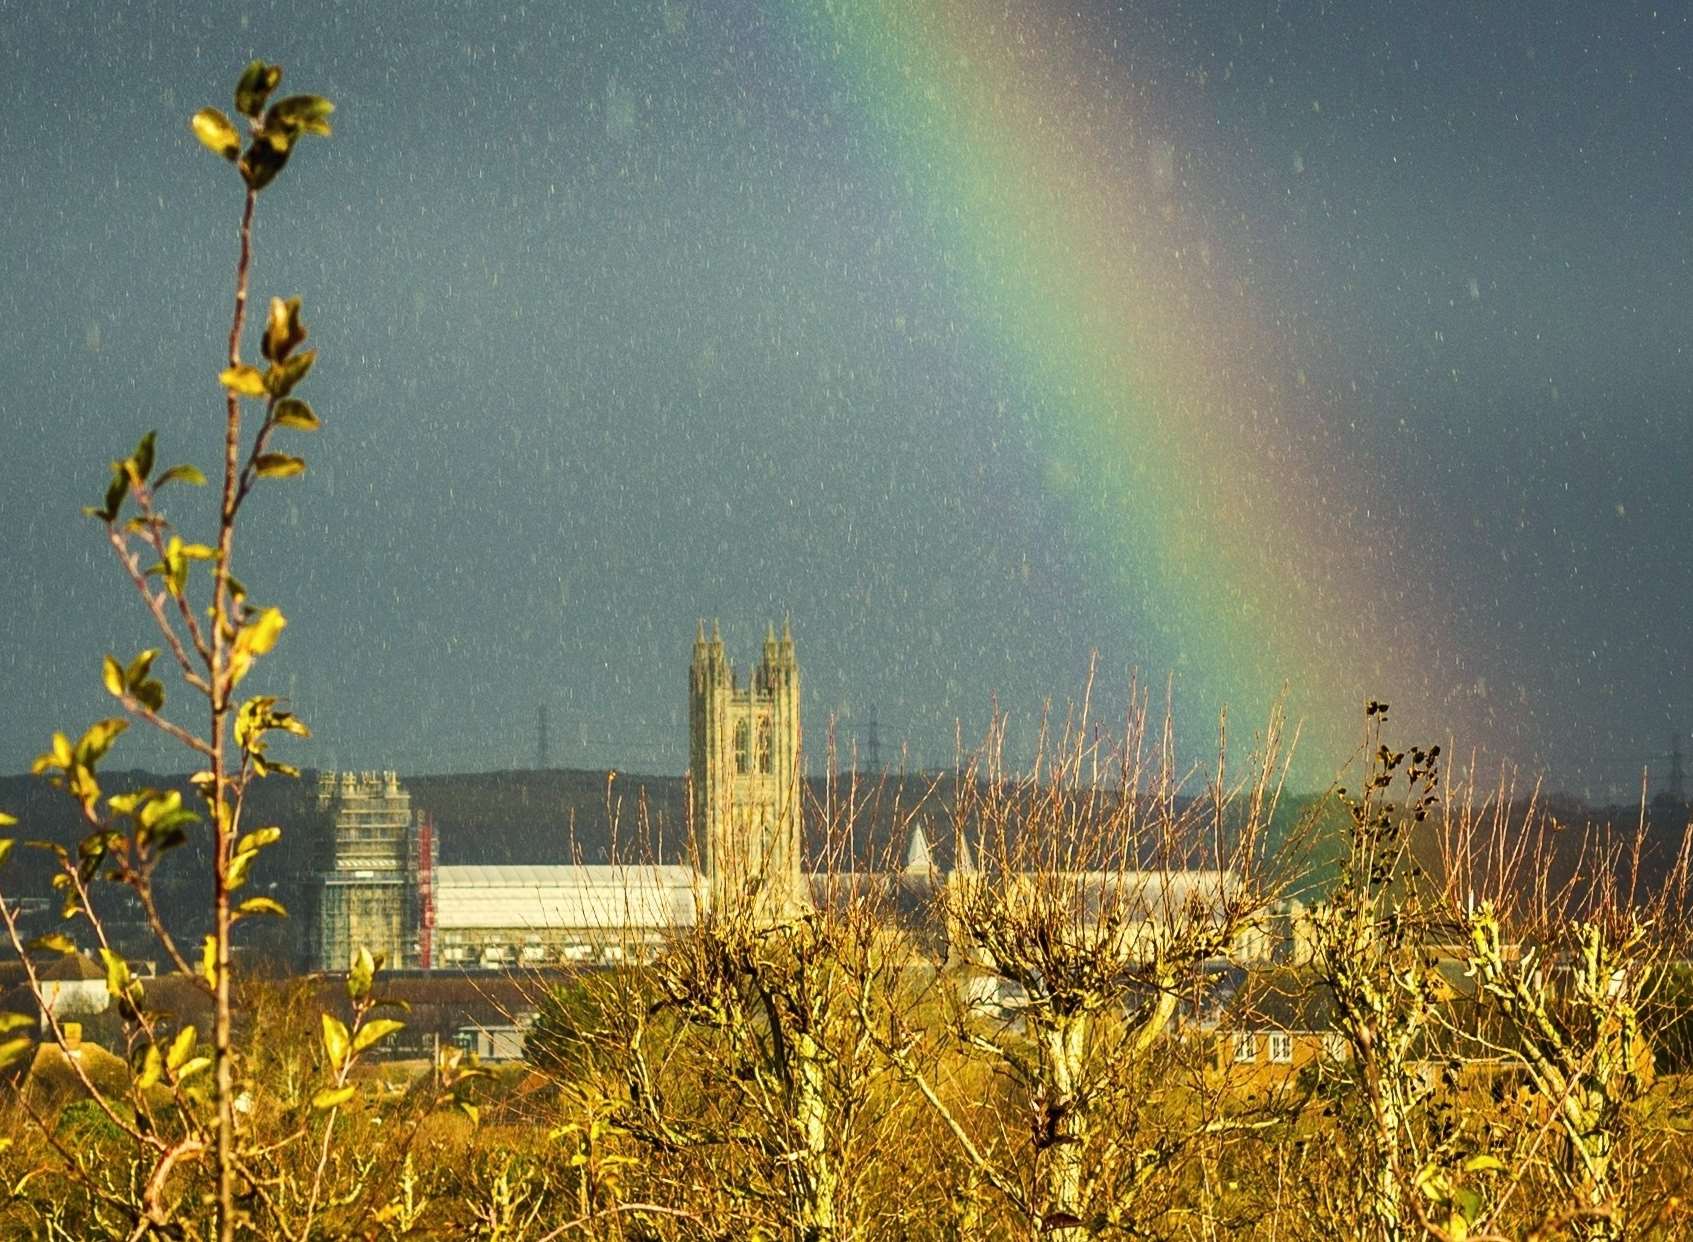 Stuart Dodd was on hand to snap this picture perfect moment overlooking Canterbury Cathedral